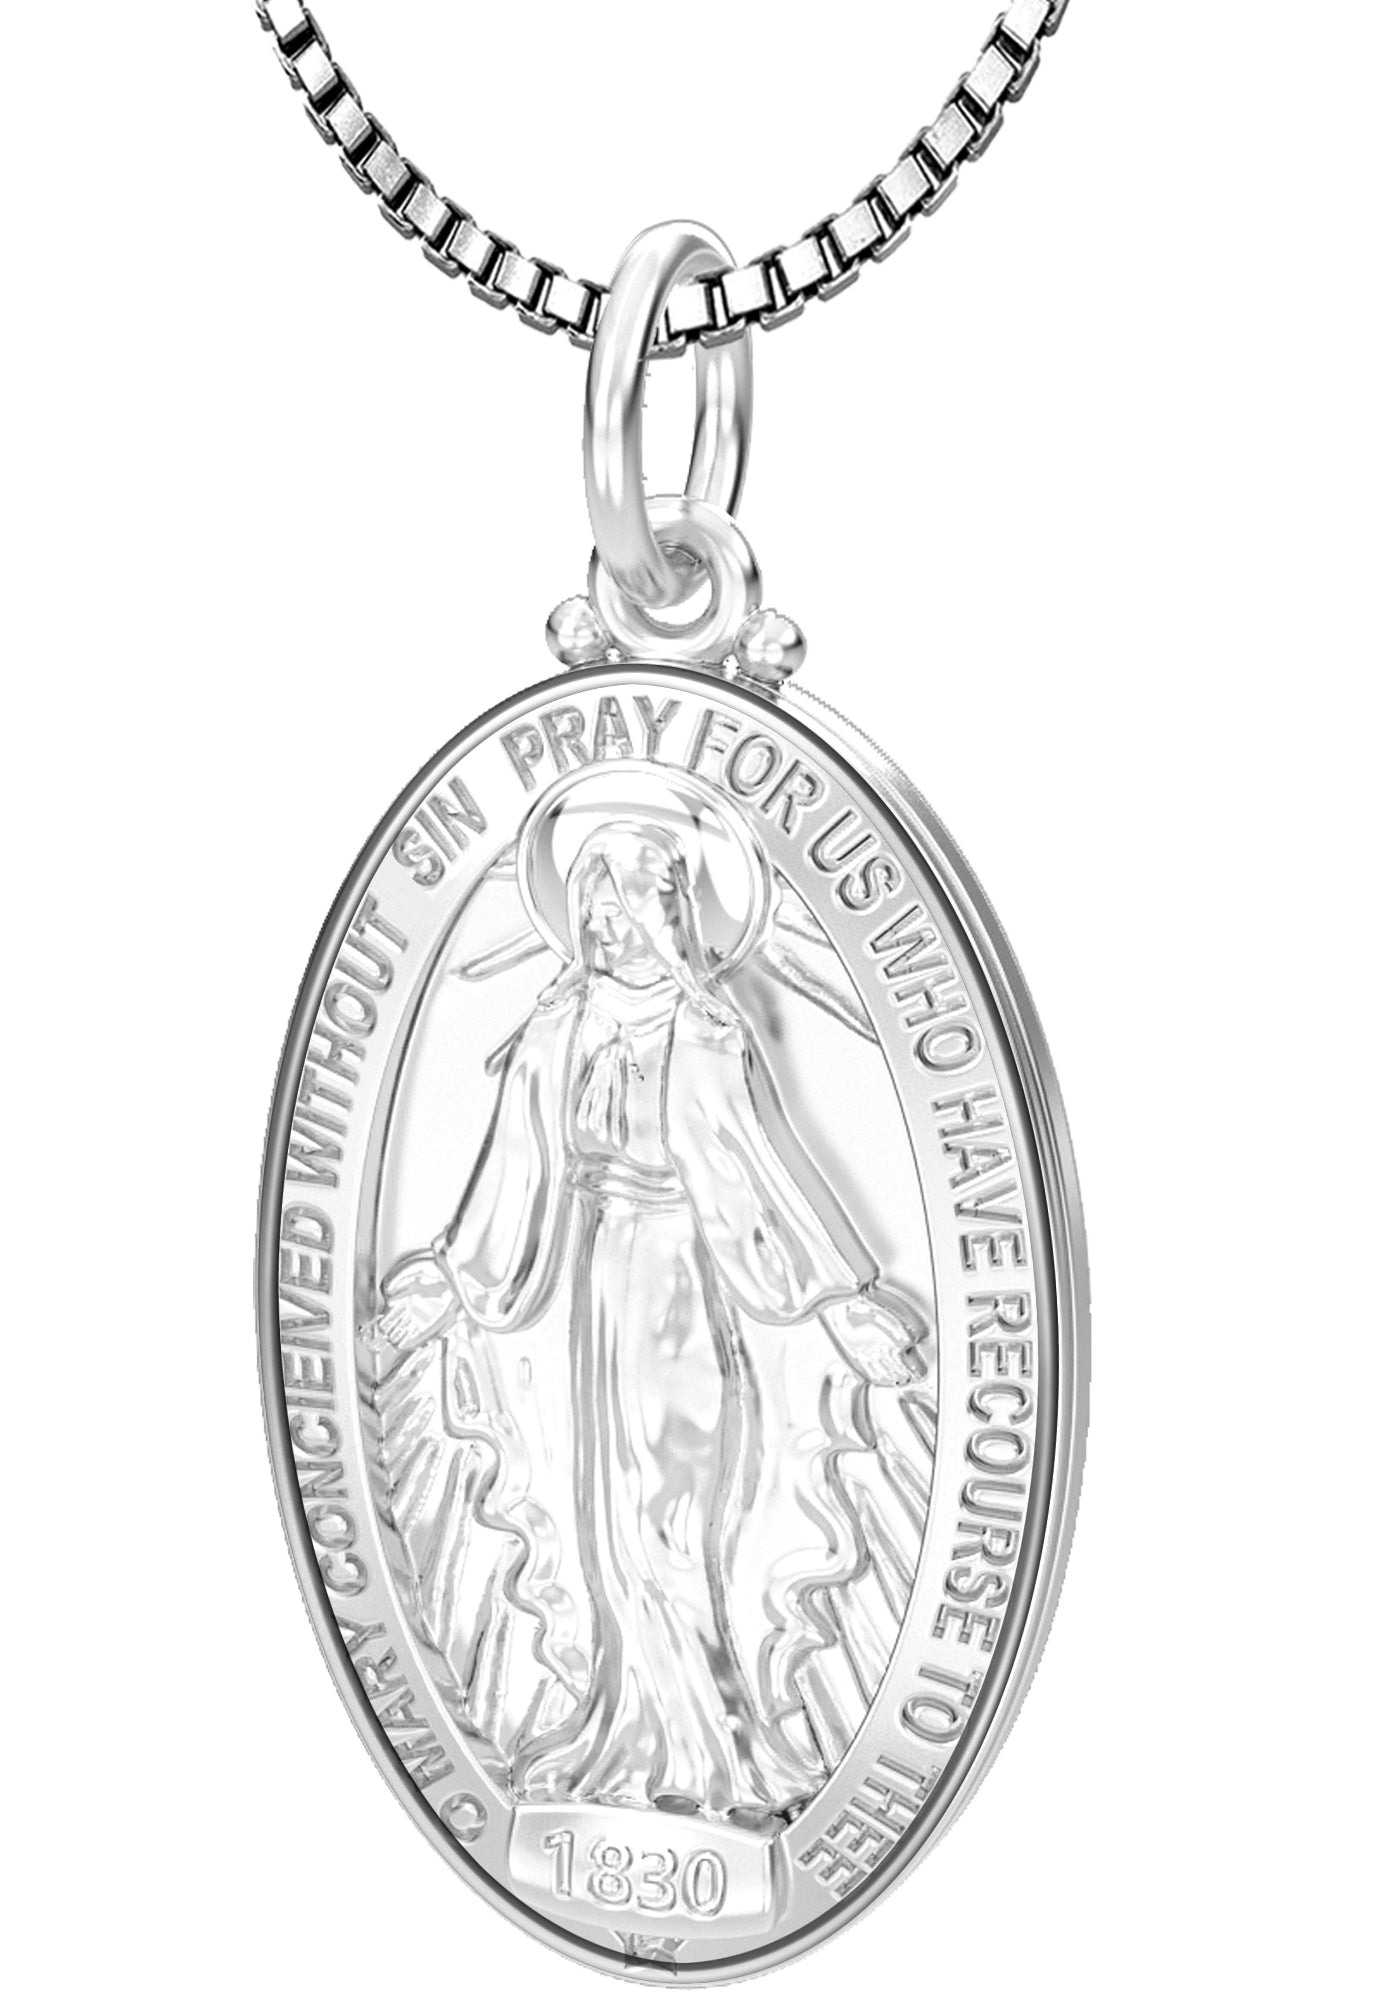 CEKAMA 925 Sterling Silver St Christopher/St Michael/Virgin Mary Necklace  The Archangel Protect Us Amulet Shield Protection Oxidized Pendant Necklace,  price in UAE | Amazon UAE | kanbkam